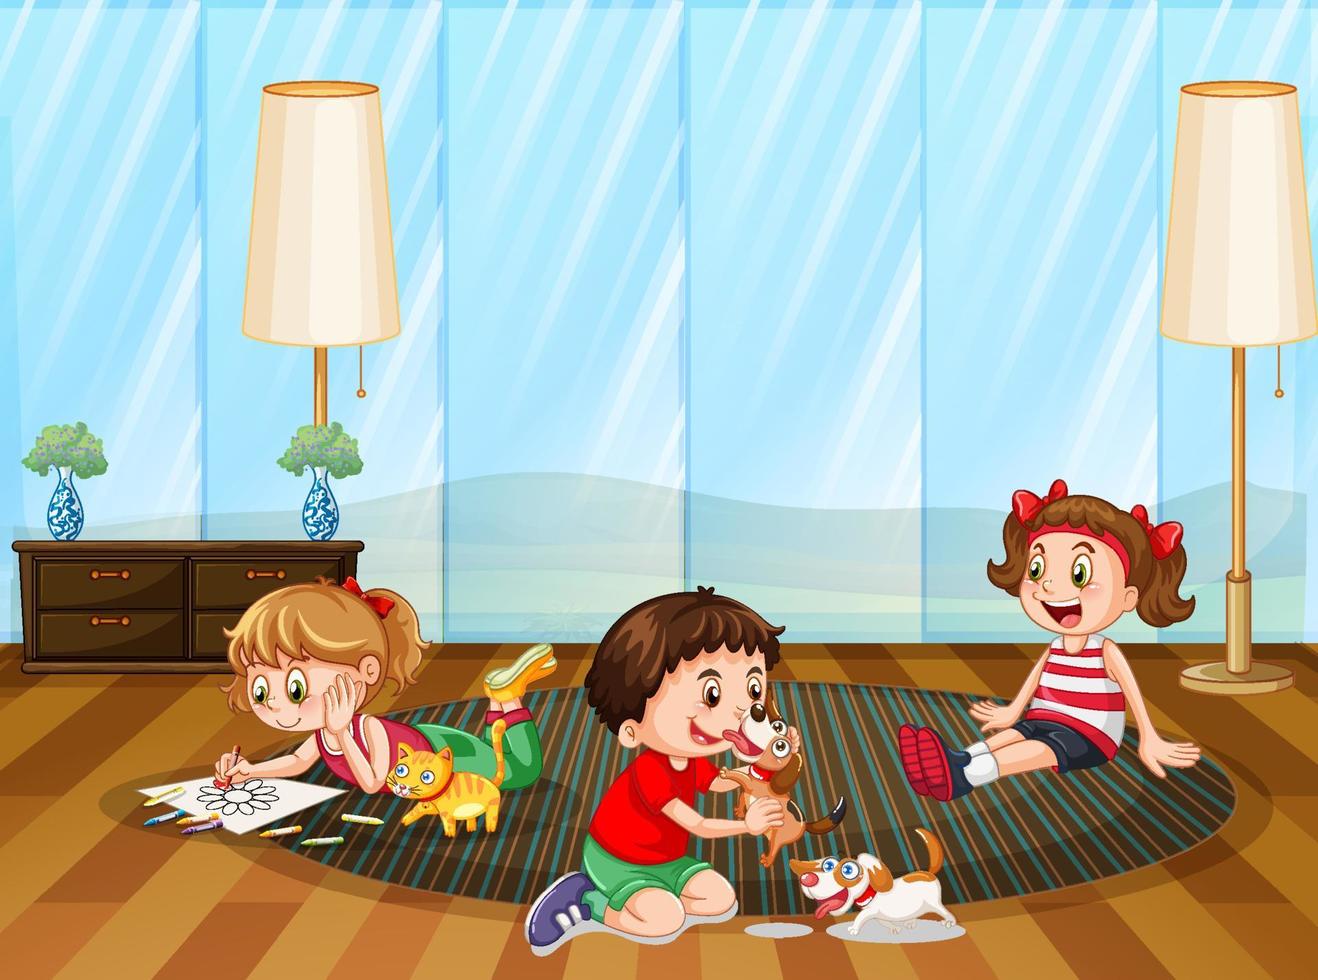 Three kids playing in the room vector